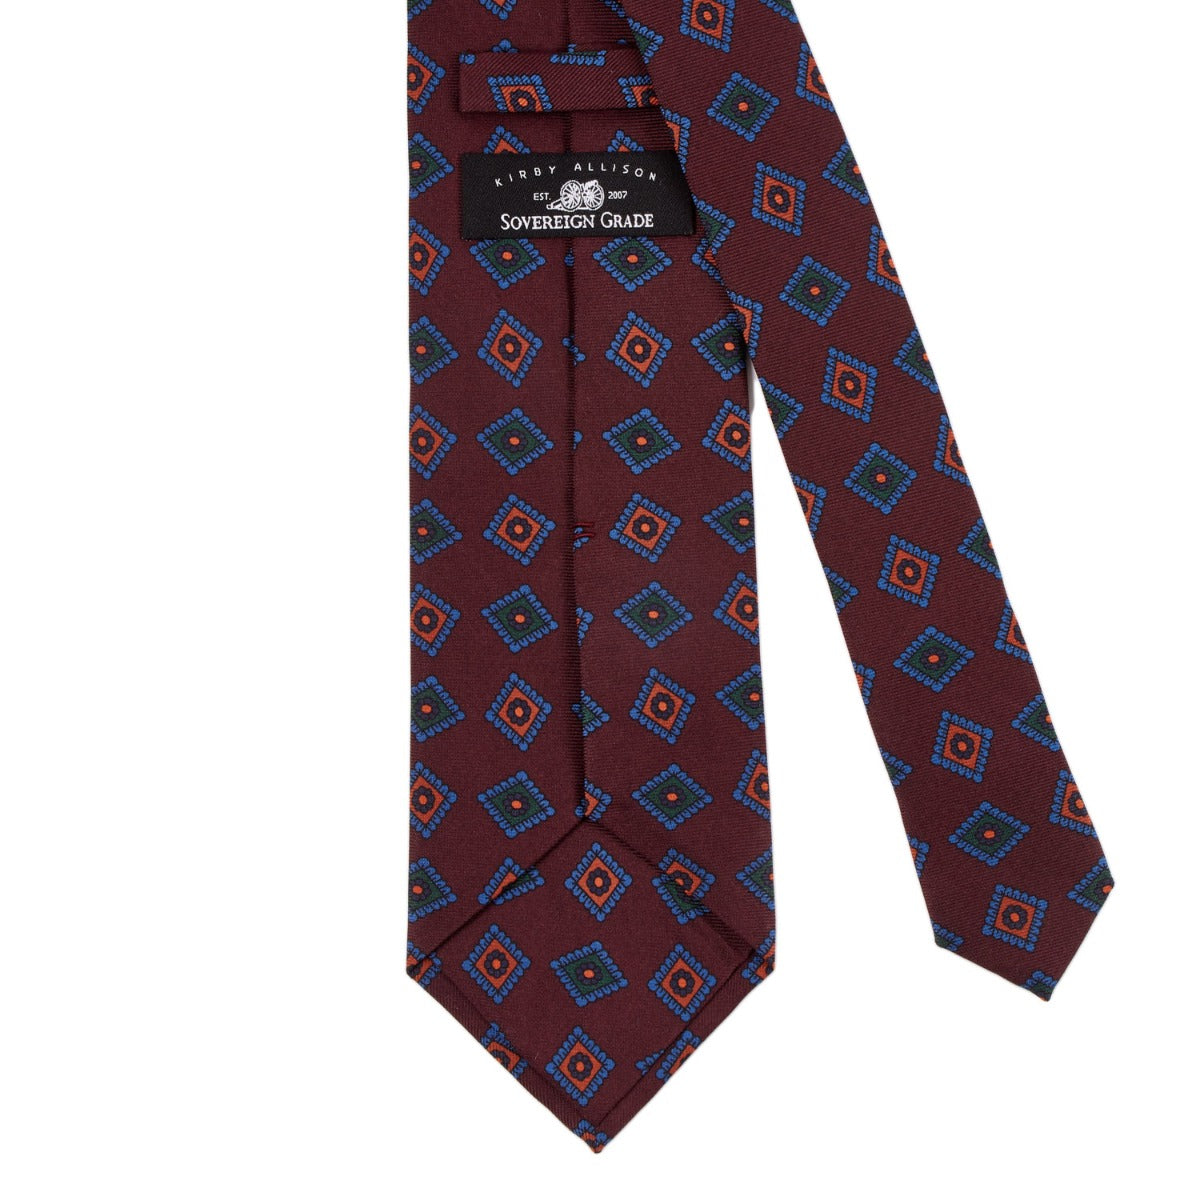 A Sovereign Grade Burgundy Art Deco Ancient Madder Silk Tie from KirbyAllison.com with a quality blue and red pattern from the United Kingdom.